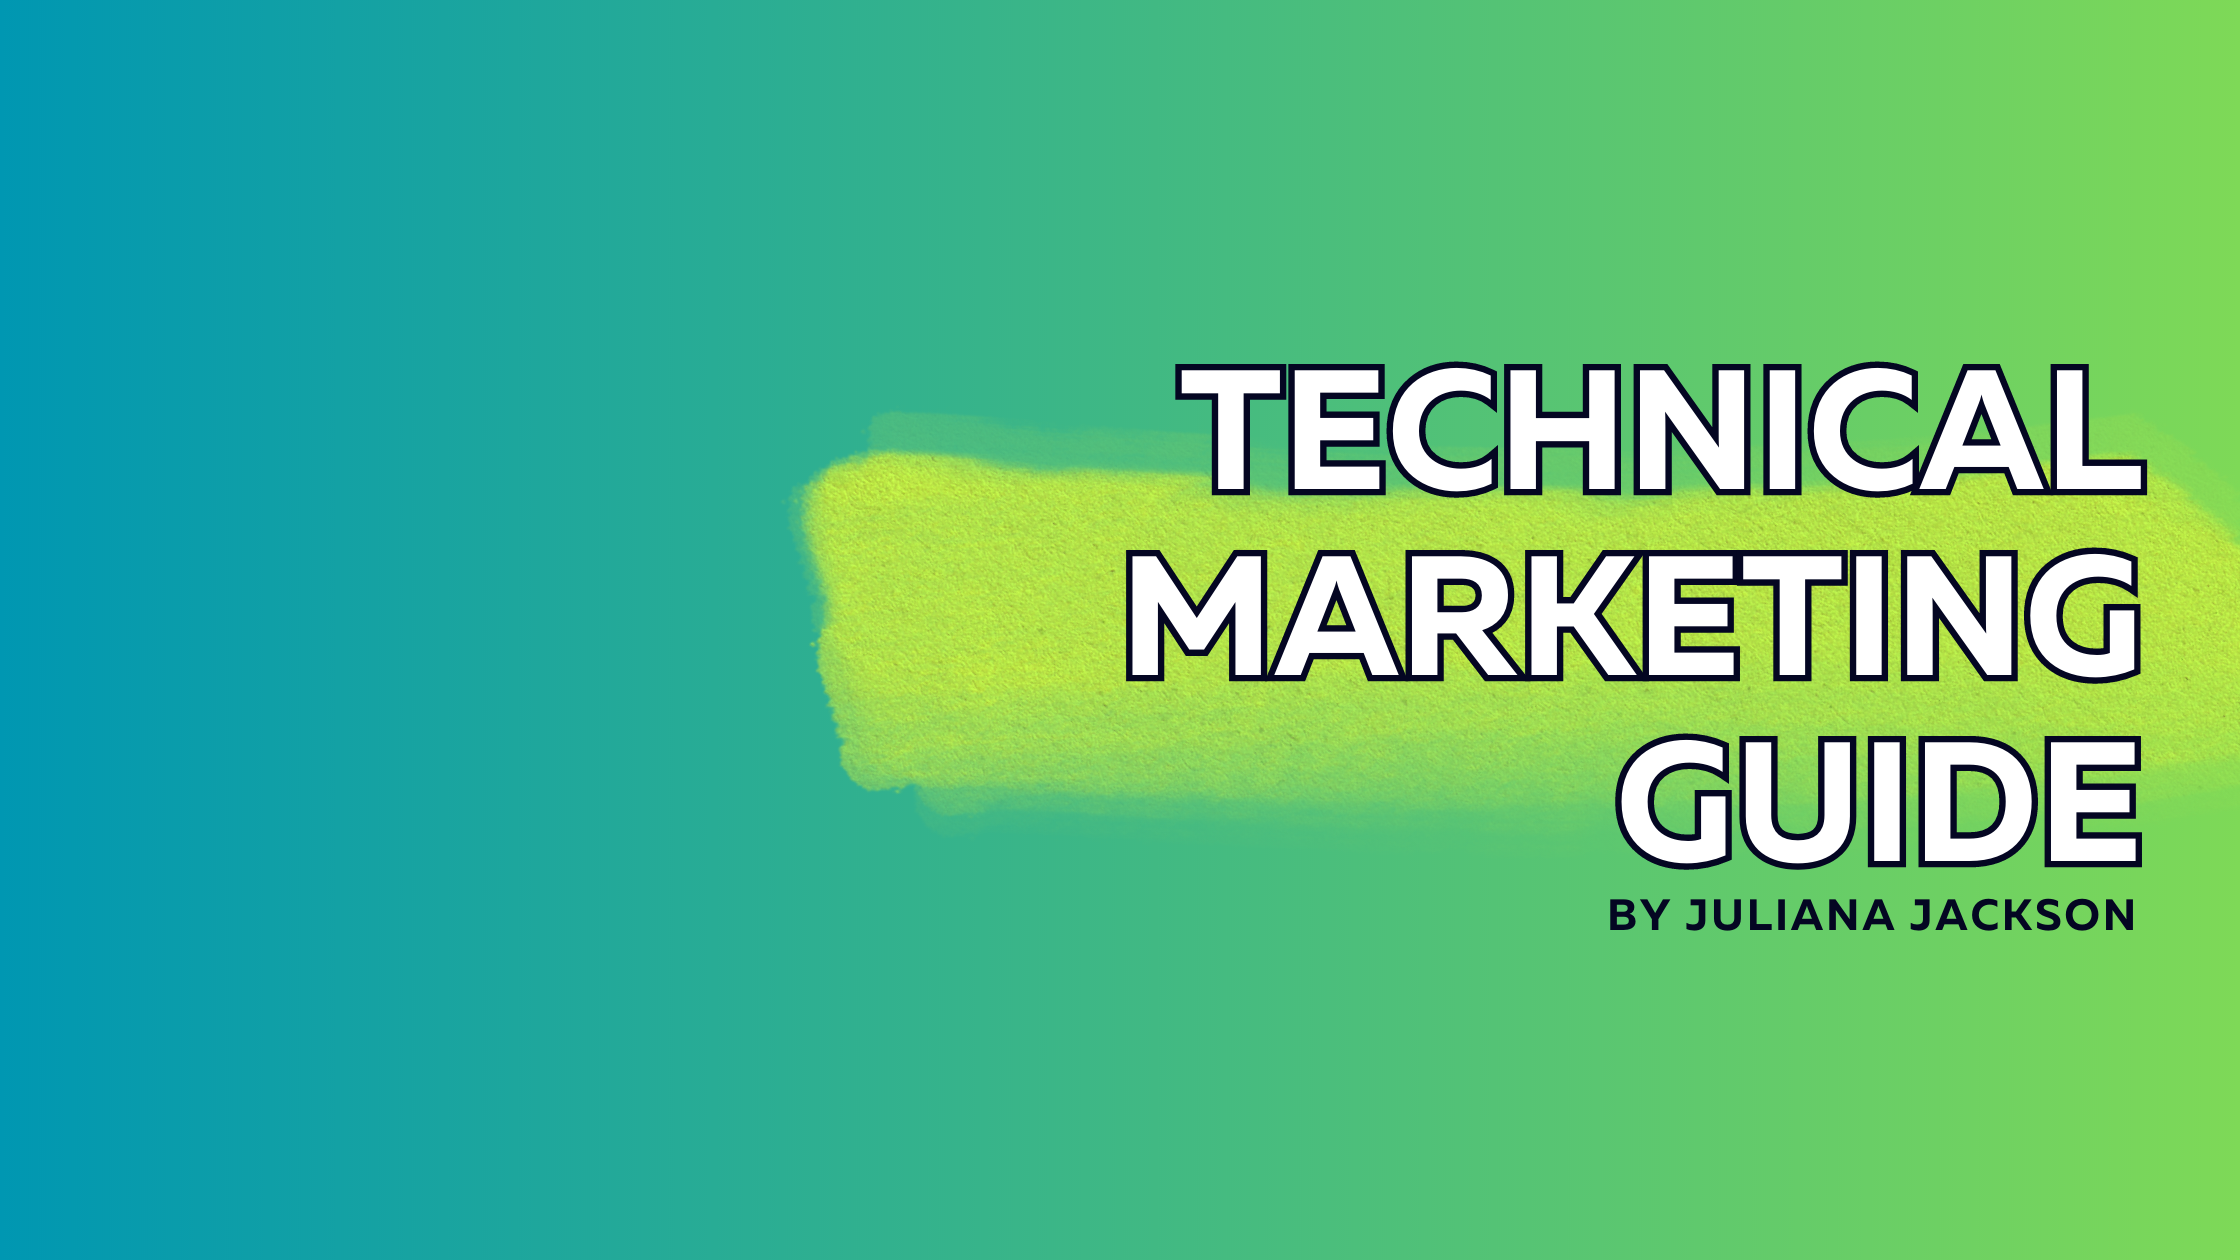 The Technical Marketing Guide - by Juliana Jackson